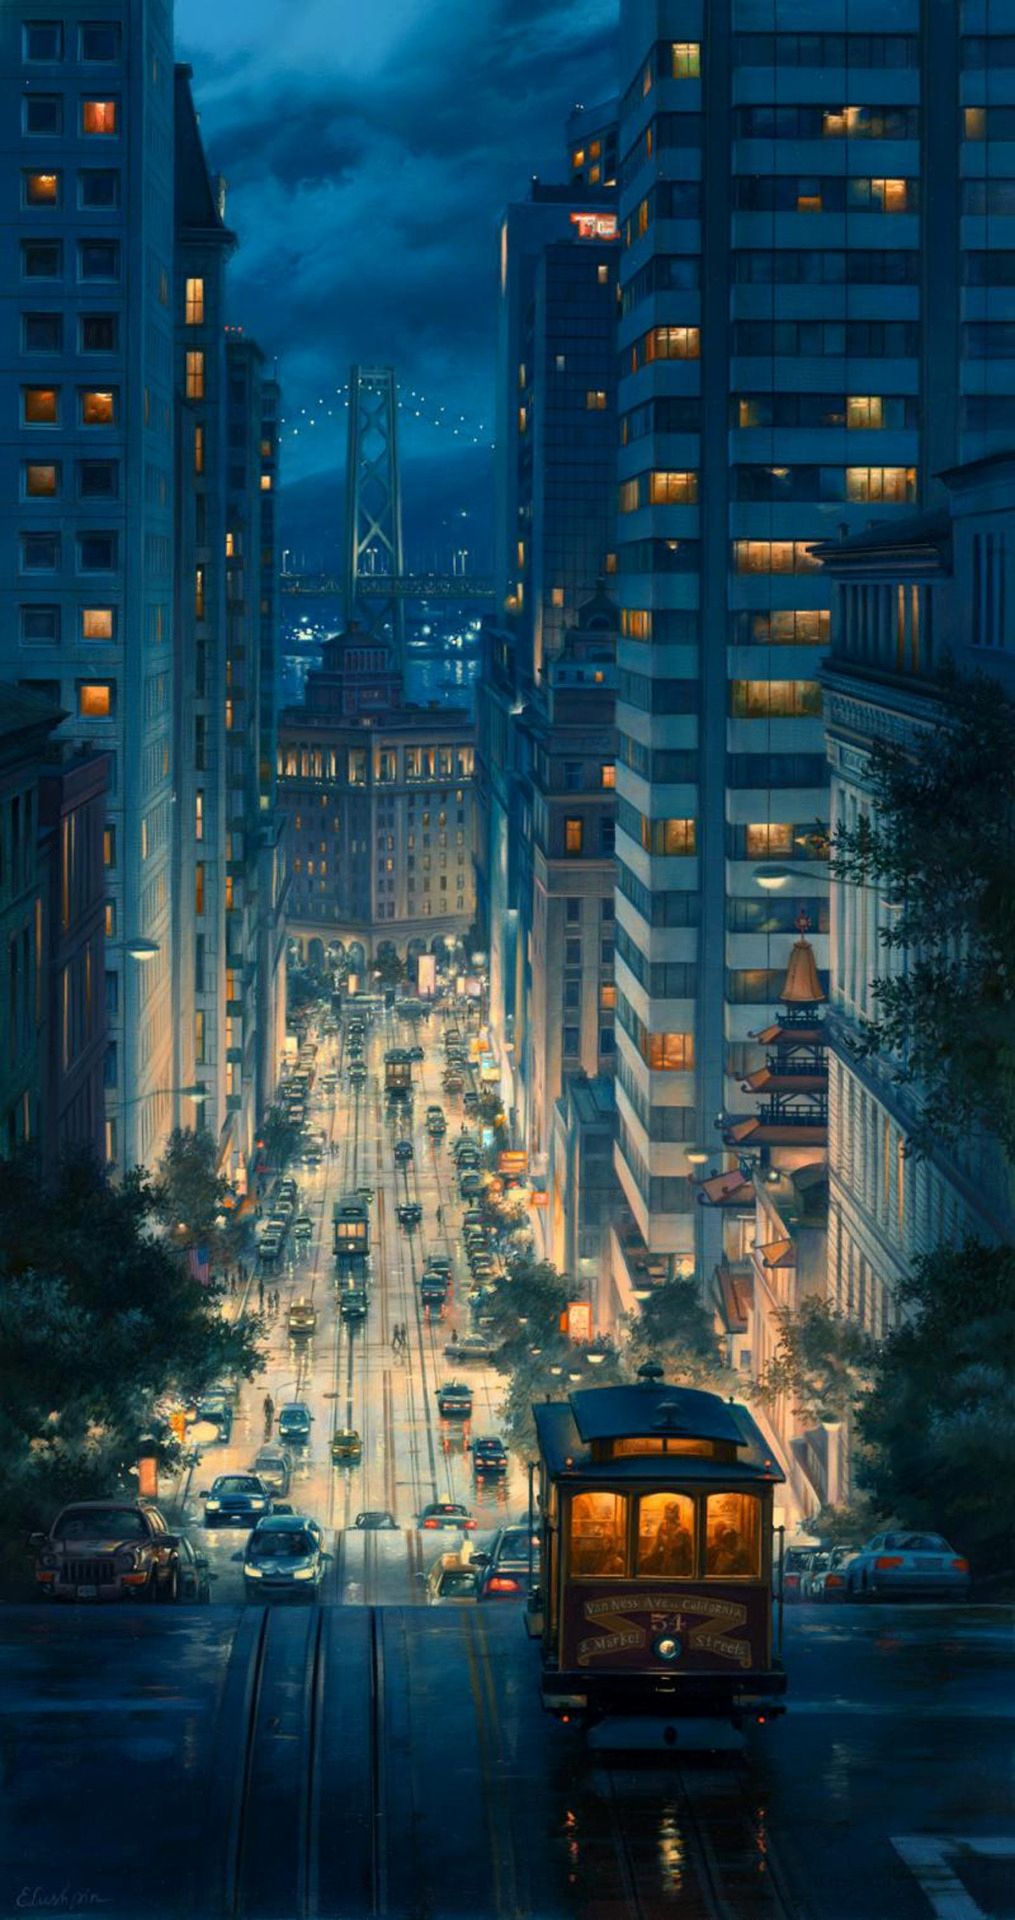 Anime Scenery City Beautiful the Art Animation Evgeny Lushpin for You of The Hudson